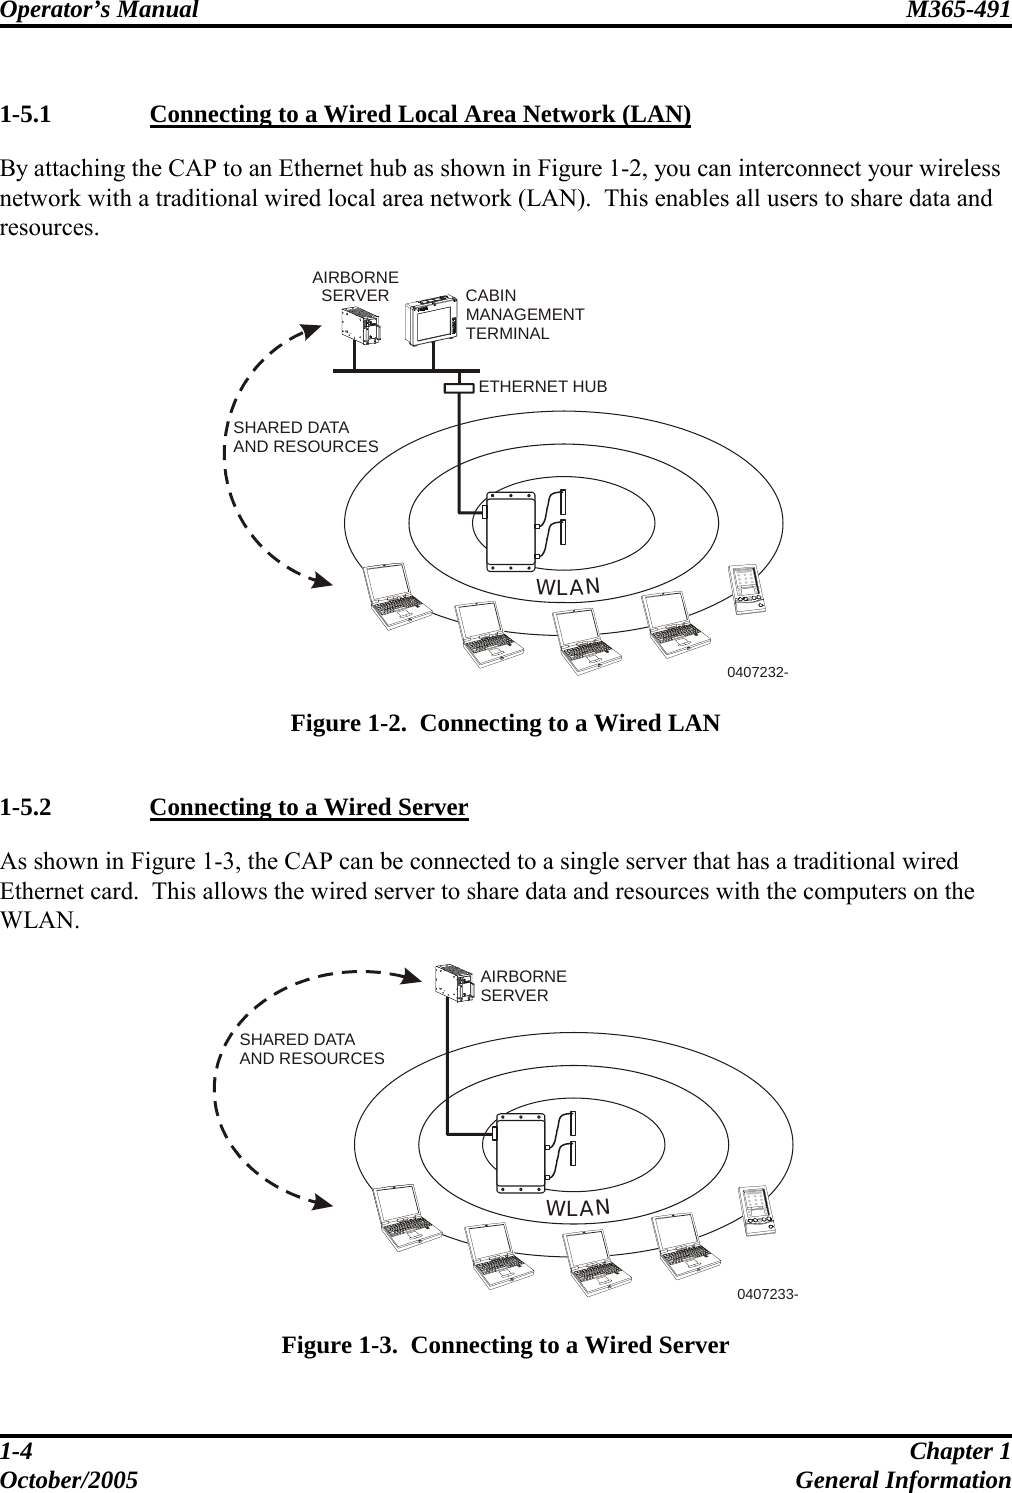 Operator’s Manual  M365-491   1-4  Chapter 1 October/2005 General Information  1-5.1   Connecting to a Wired Local Area Network (LAN) By attaching the CAP to an Ethernet hub as shown in Figure 1-2, you can interconnect your wireless network with a traditional wired local area network (LAN).  This enables all users to share data and resources.  WLANETHERNET HUBSHARED DATAAND RESOURCES0407232-AIRBORNESERVER CABINMANAGEMENTTERMINAL  Figure 1-2.  Connecting to a Wired LAN  1-5.2   Connecting to a Wired Server As shown in Figure 1-3, the CAP can be connected to a single server that has a traditional wired Ethernet card.  This allows the wired server to share data and resources with the computers on the WLAN.  WLANSHARED DATAAND RESOURCES0407233-AIRBORNESERVER  Figure 1-3.  Connecting to a Wired Server 